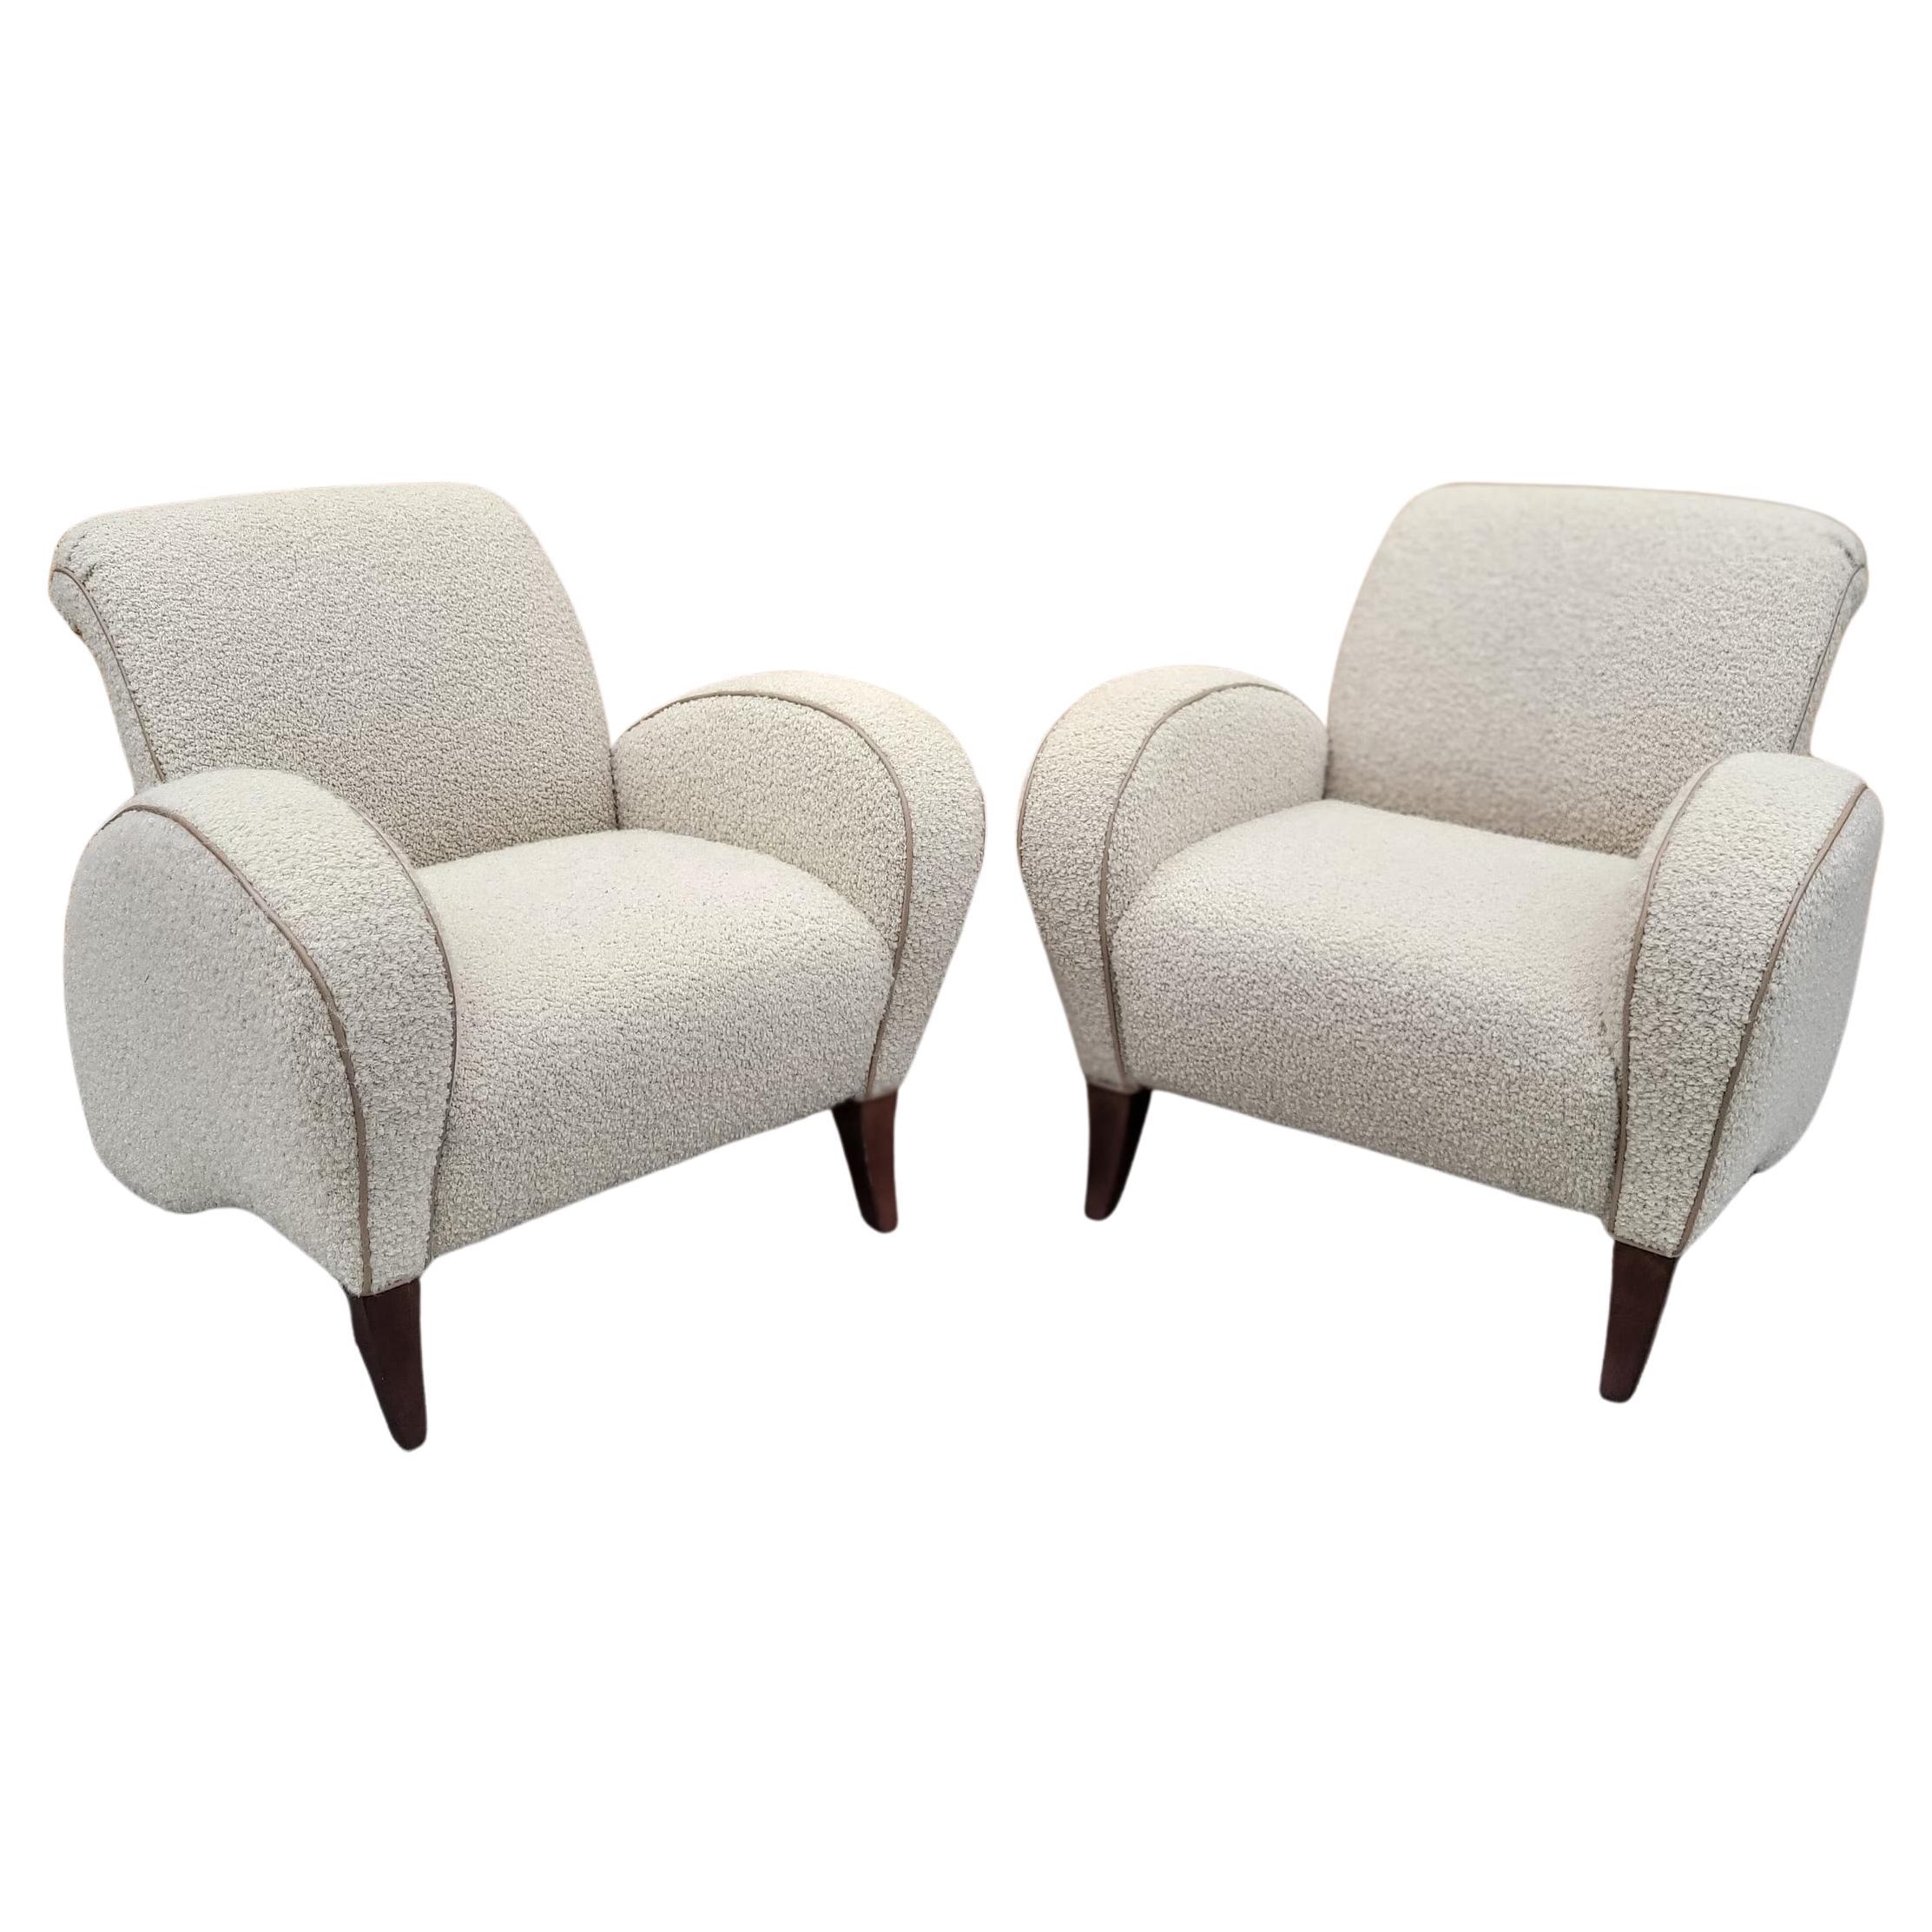 Italian Art Deco Club Chairs in Wool Boucle with Italian Leather Trim - Pair